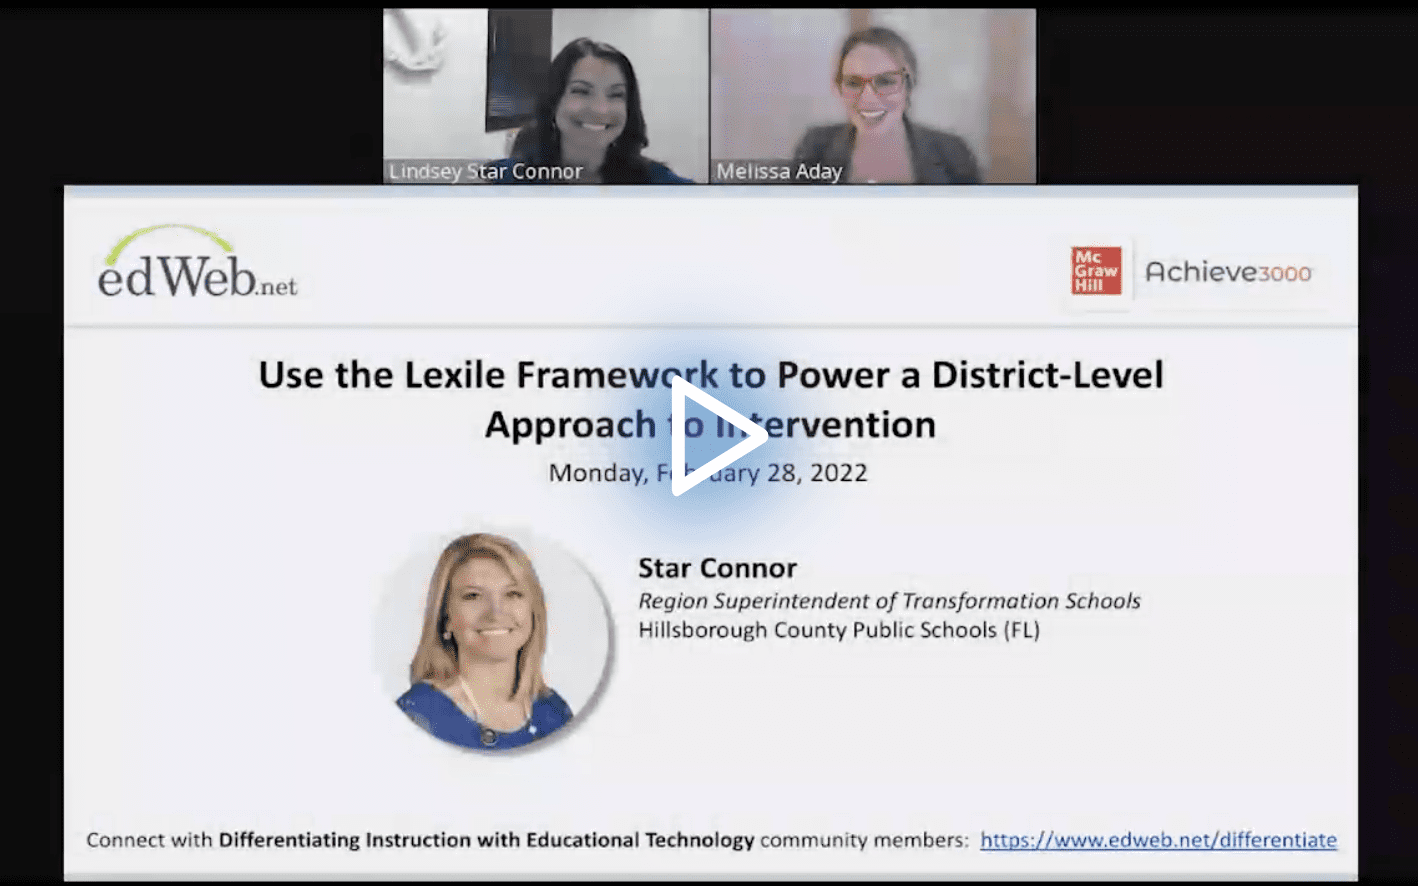 Use the Lexile Framework to Power a District-Level Approach to Intervention edLeader Panel recording link